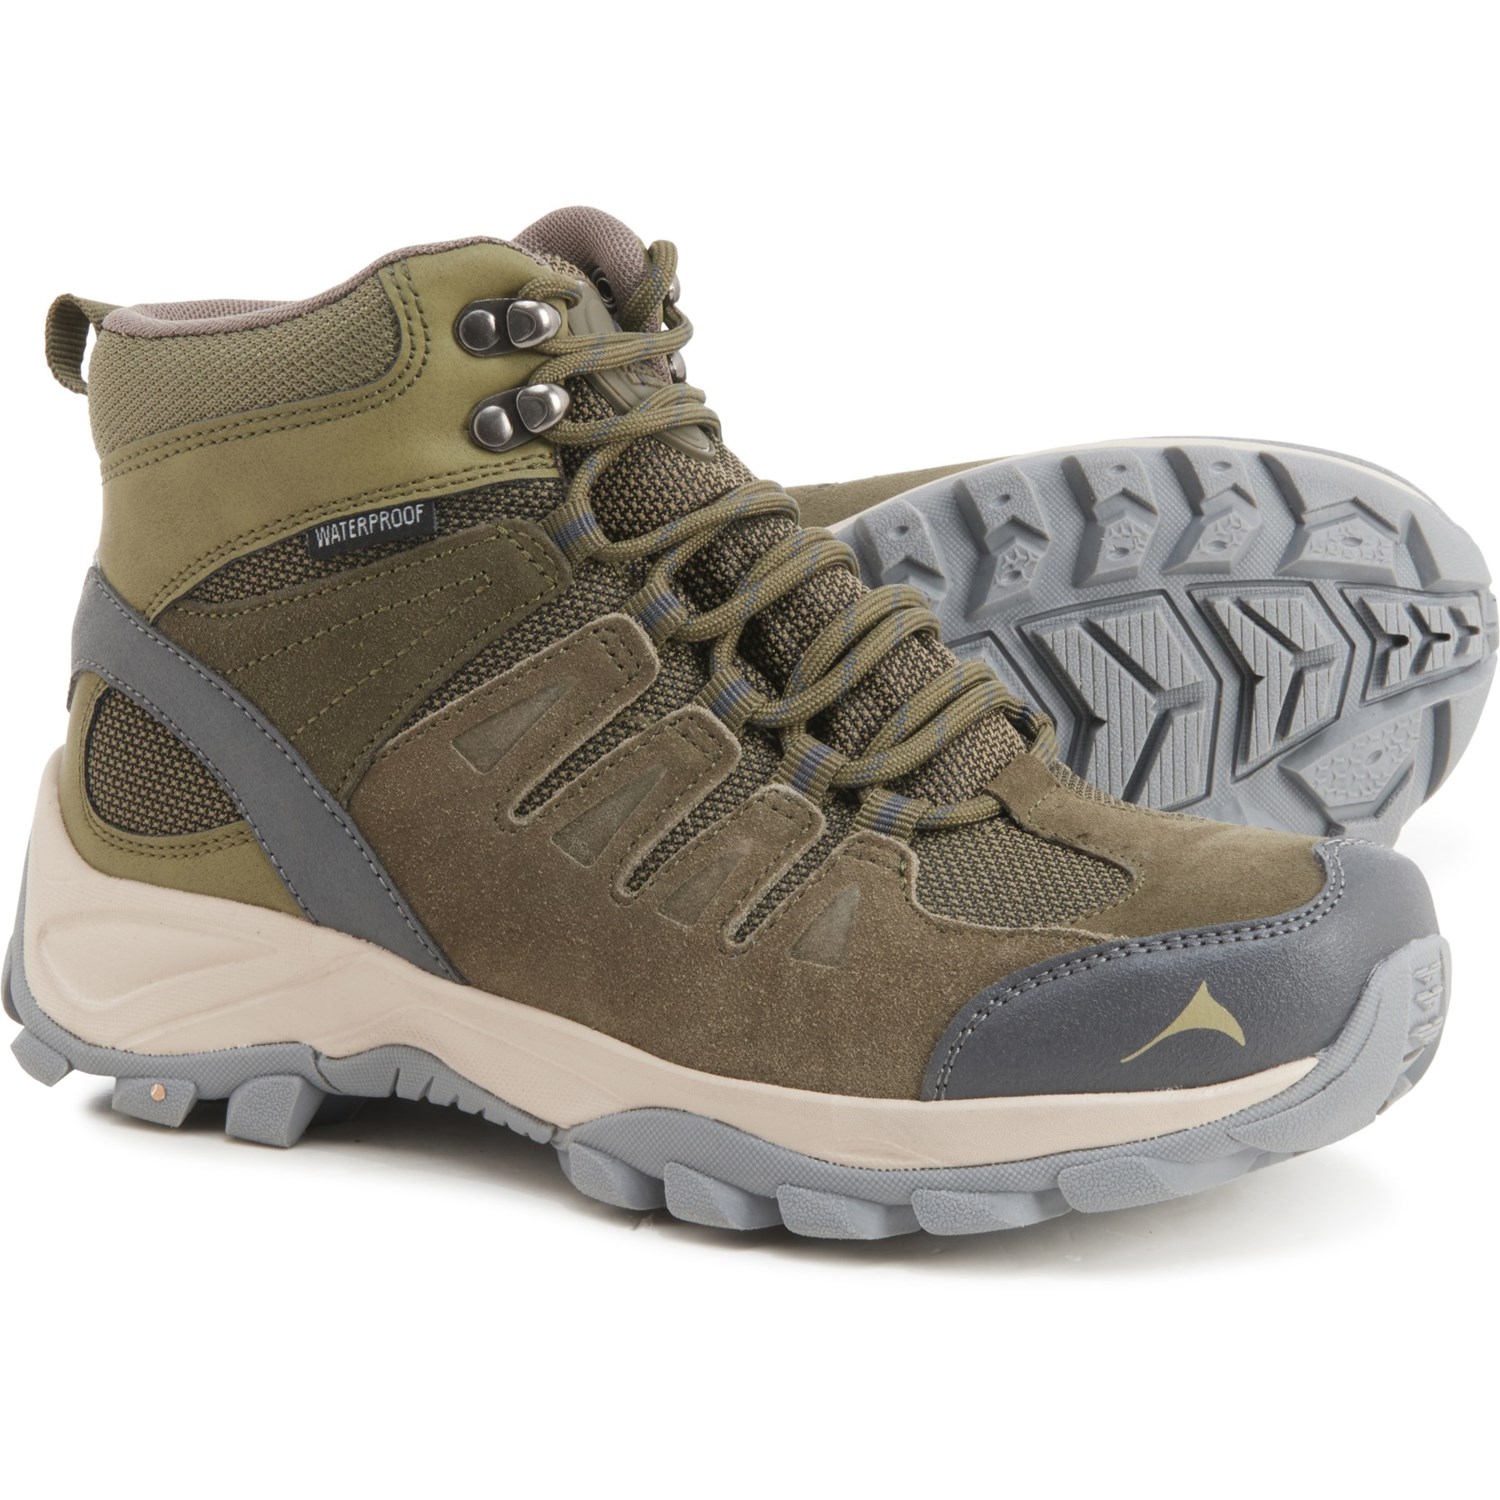 Pacific Mountain Boulder Mid Hiking Boots - Waterproof, Suede (For Women)